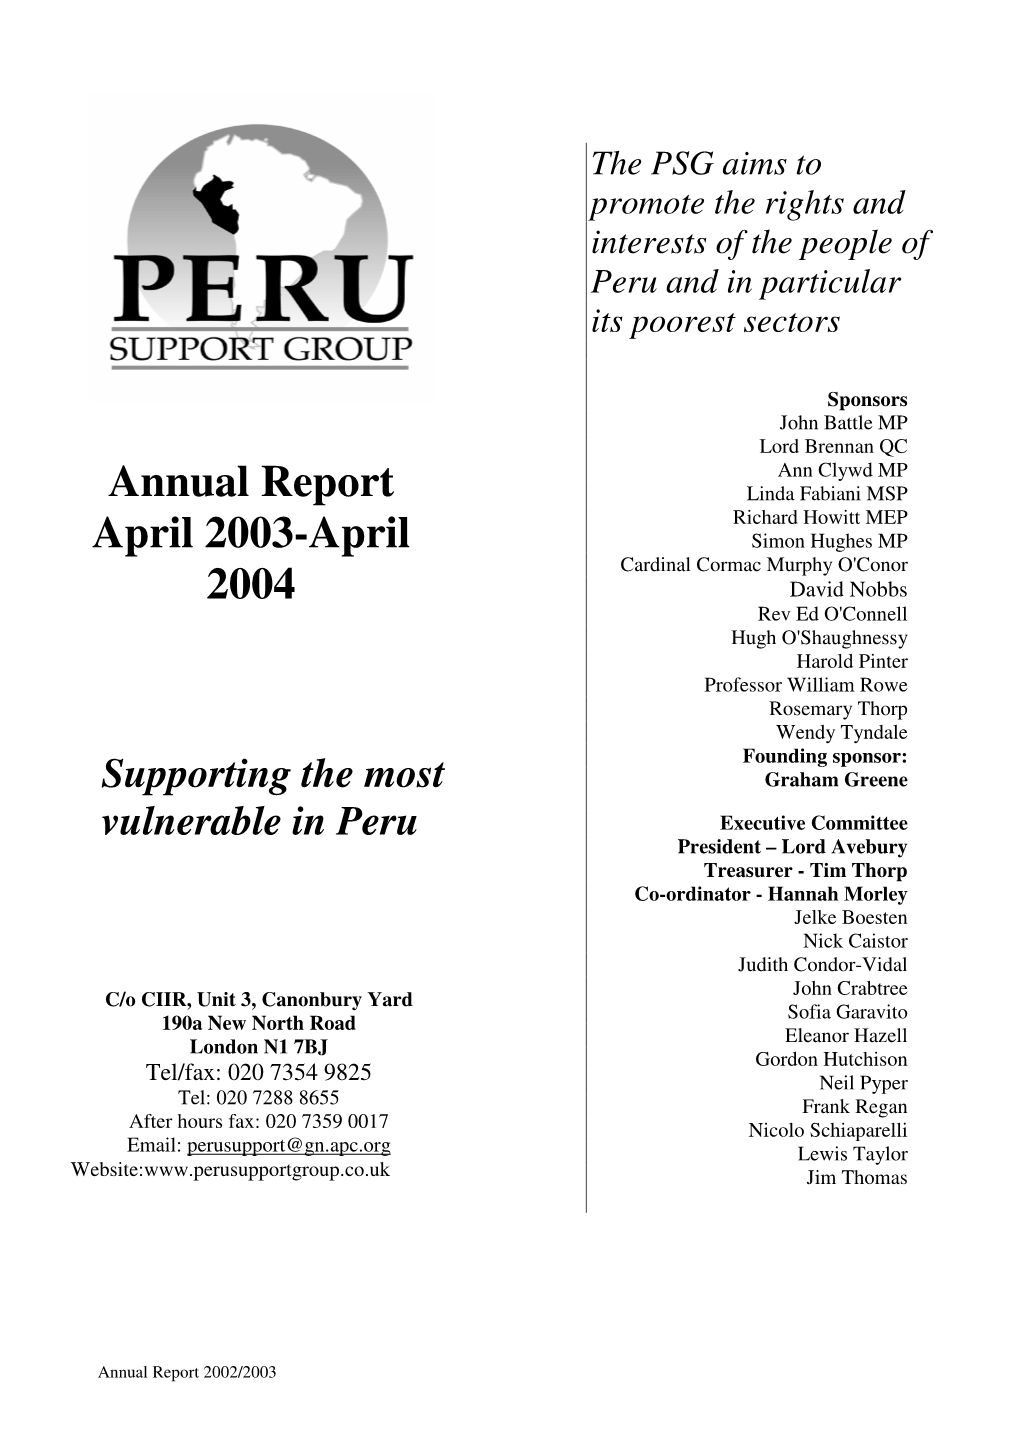 Peru Support Group Annual Report 2003/2004